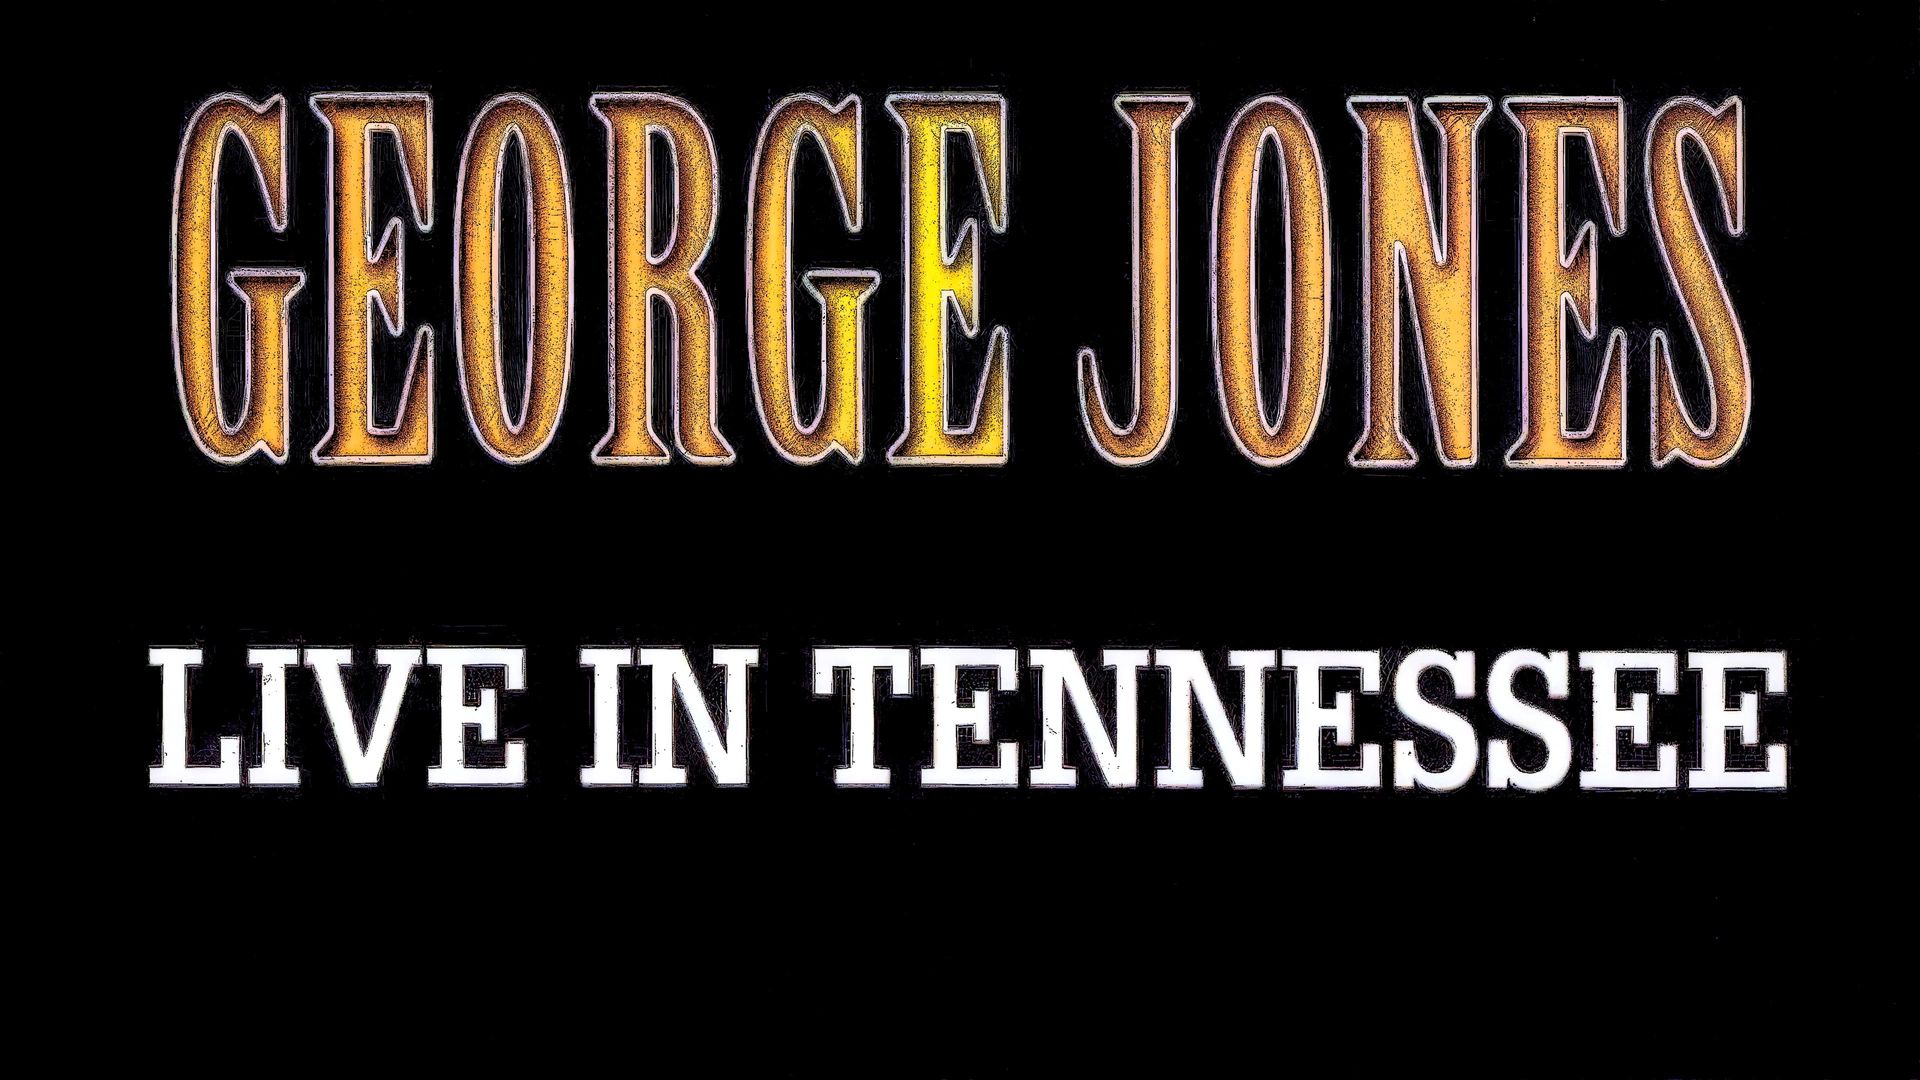 George Jones: Live in Tennessee background